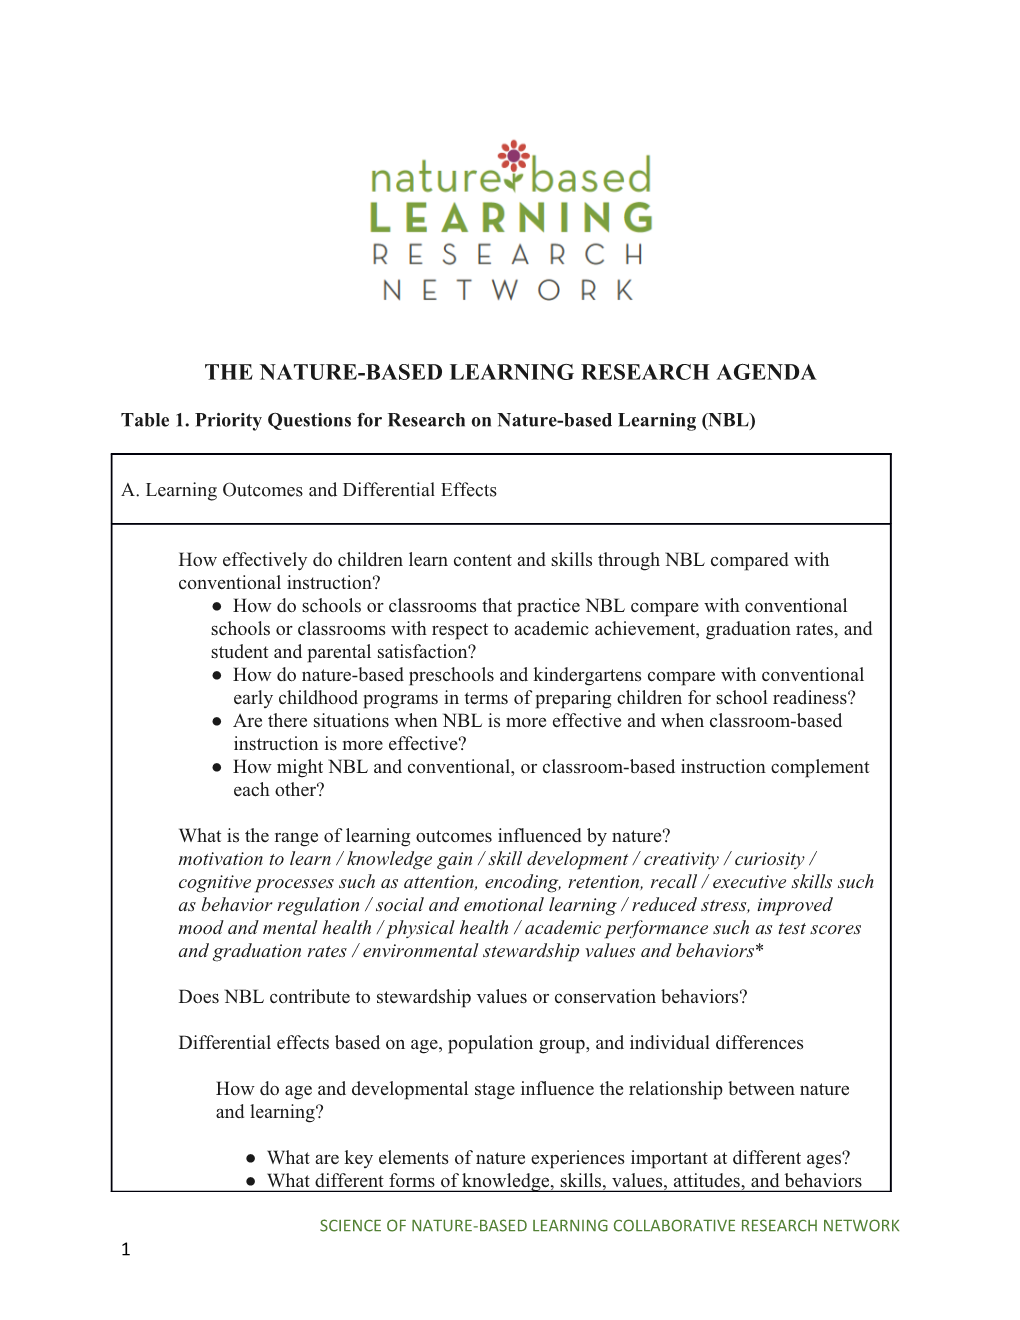 The Nature-Based Learning Research Agenda